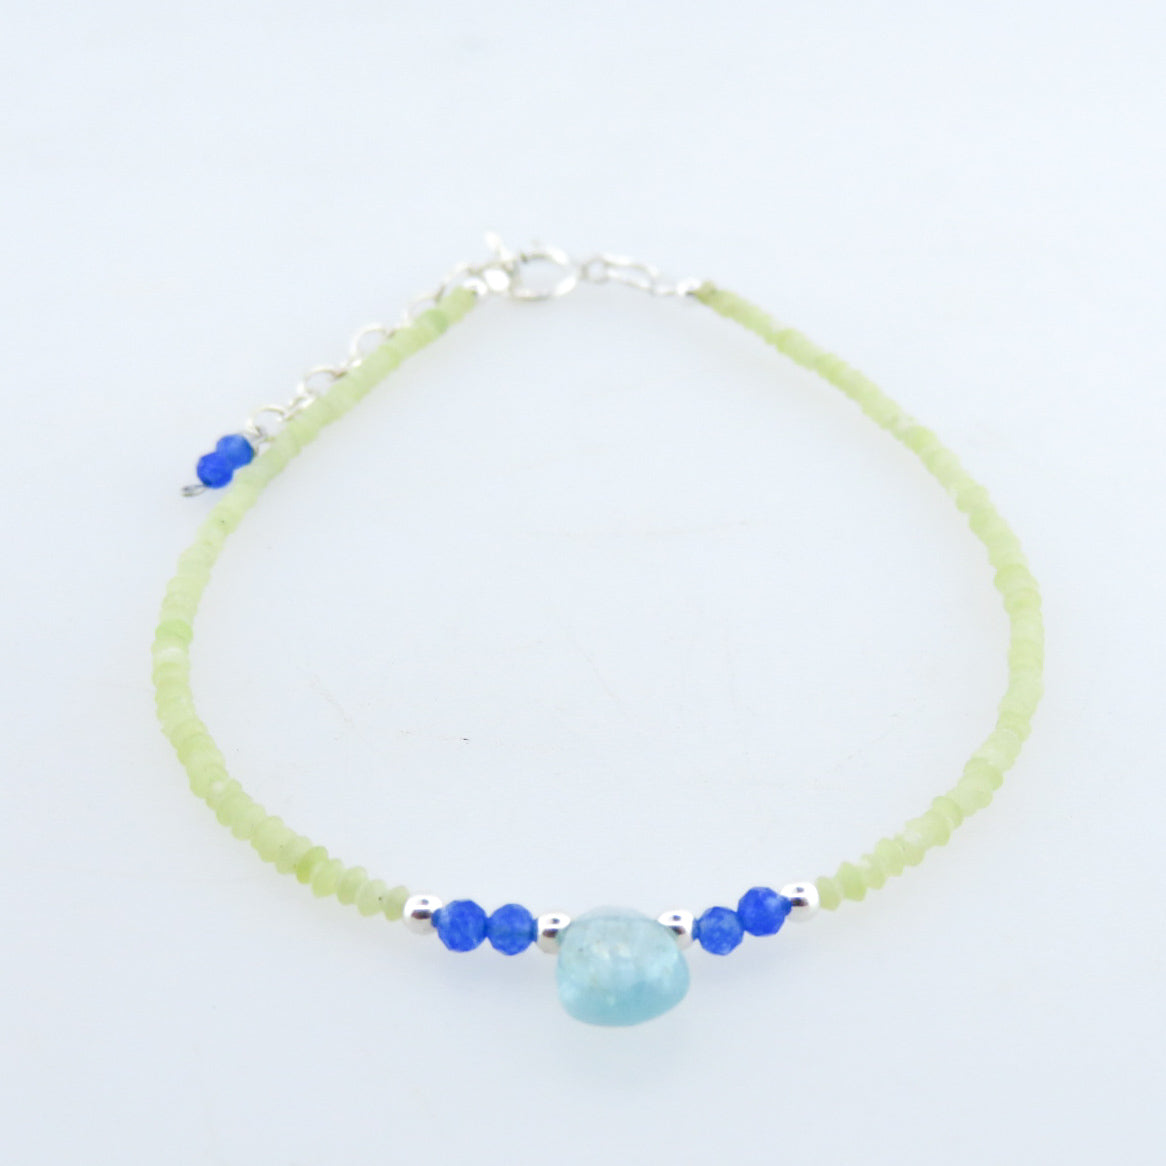 Jade Bracelet with Blue Topaz, Blue Agate and Silver Beads